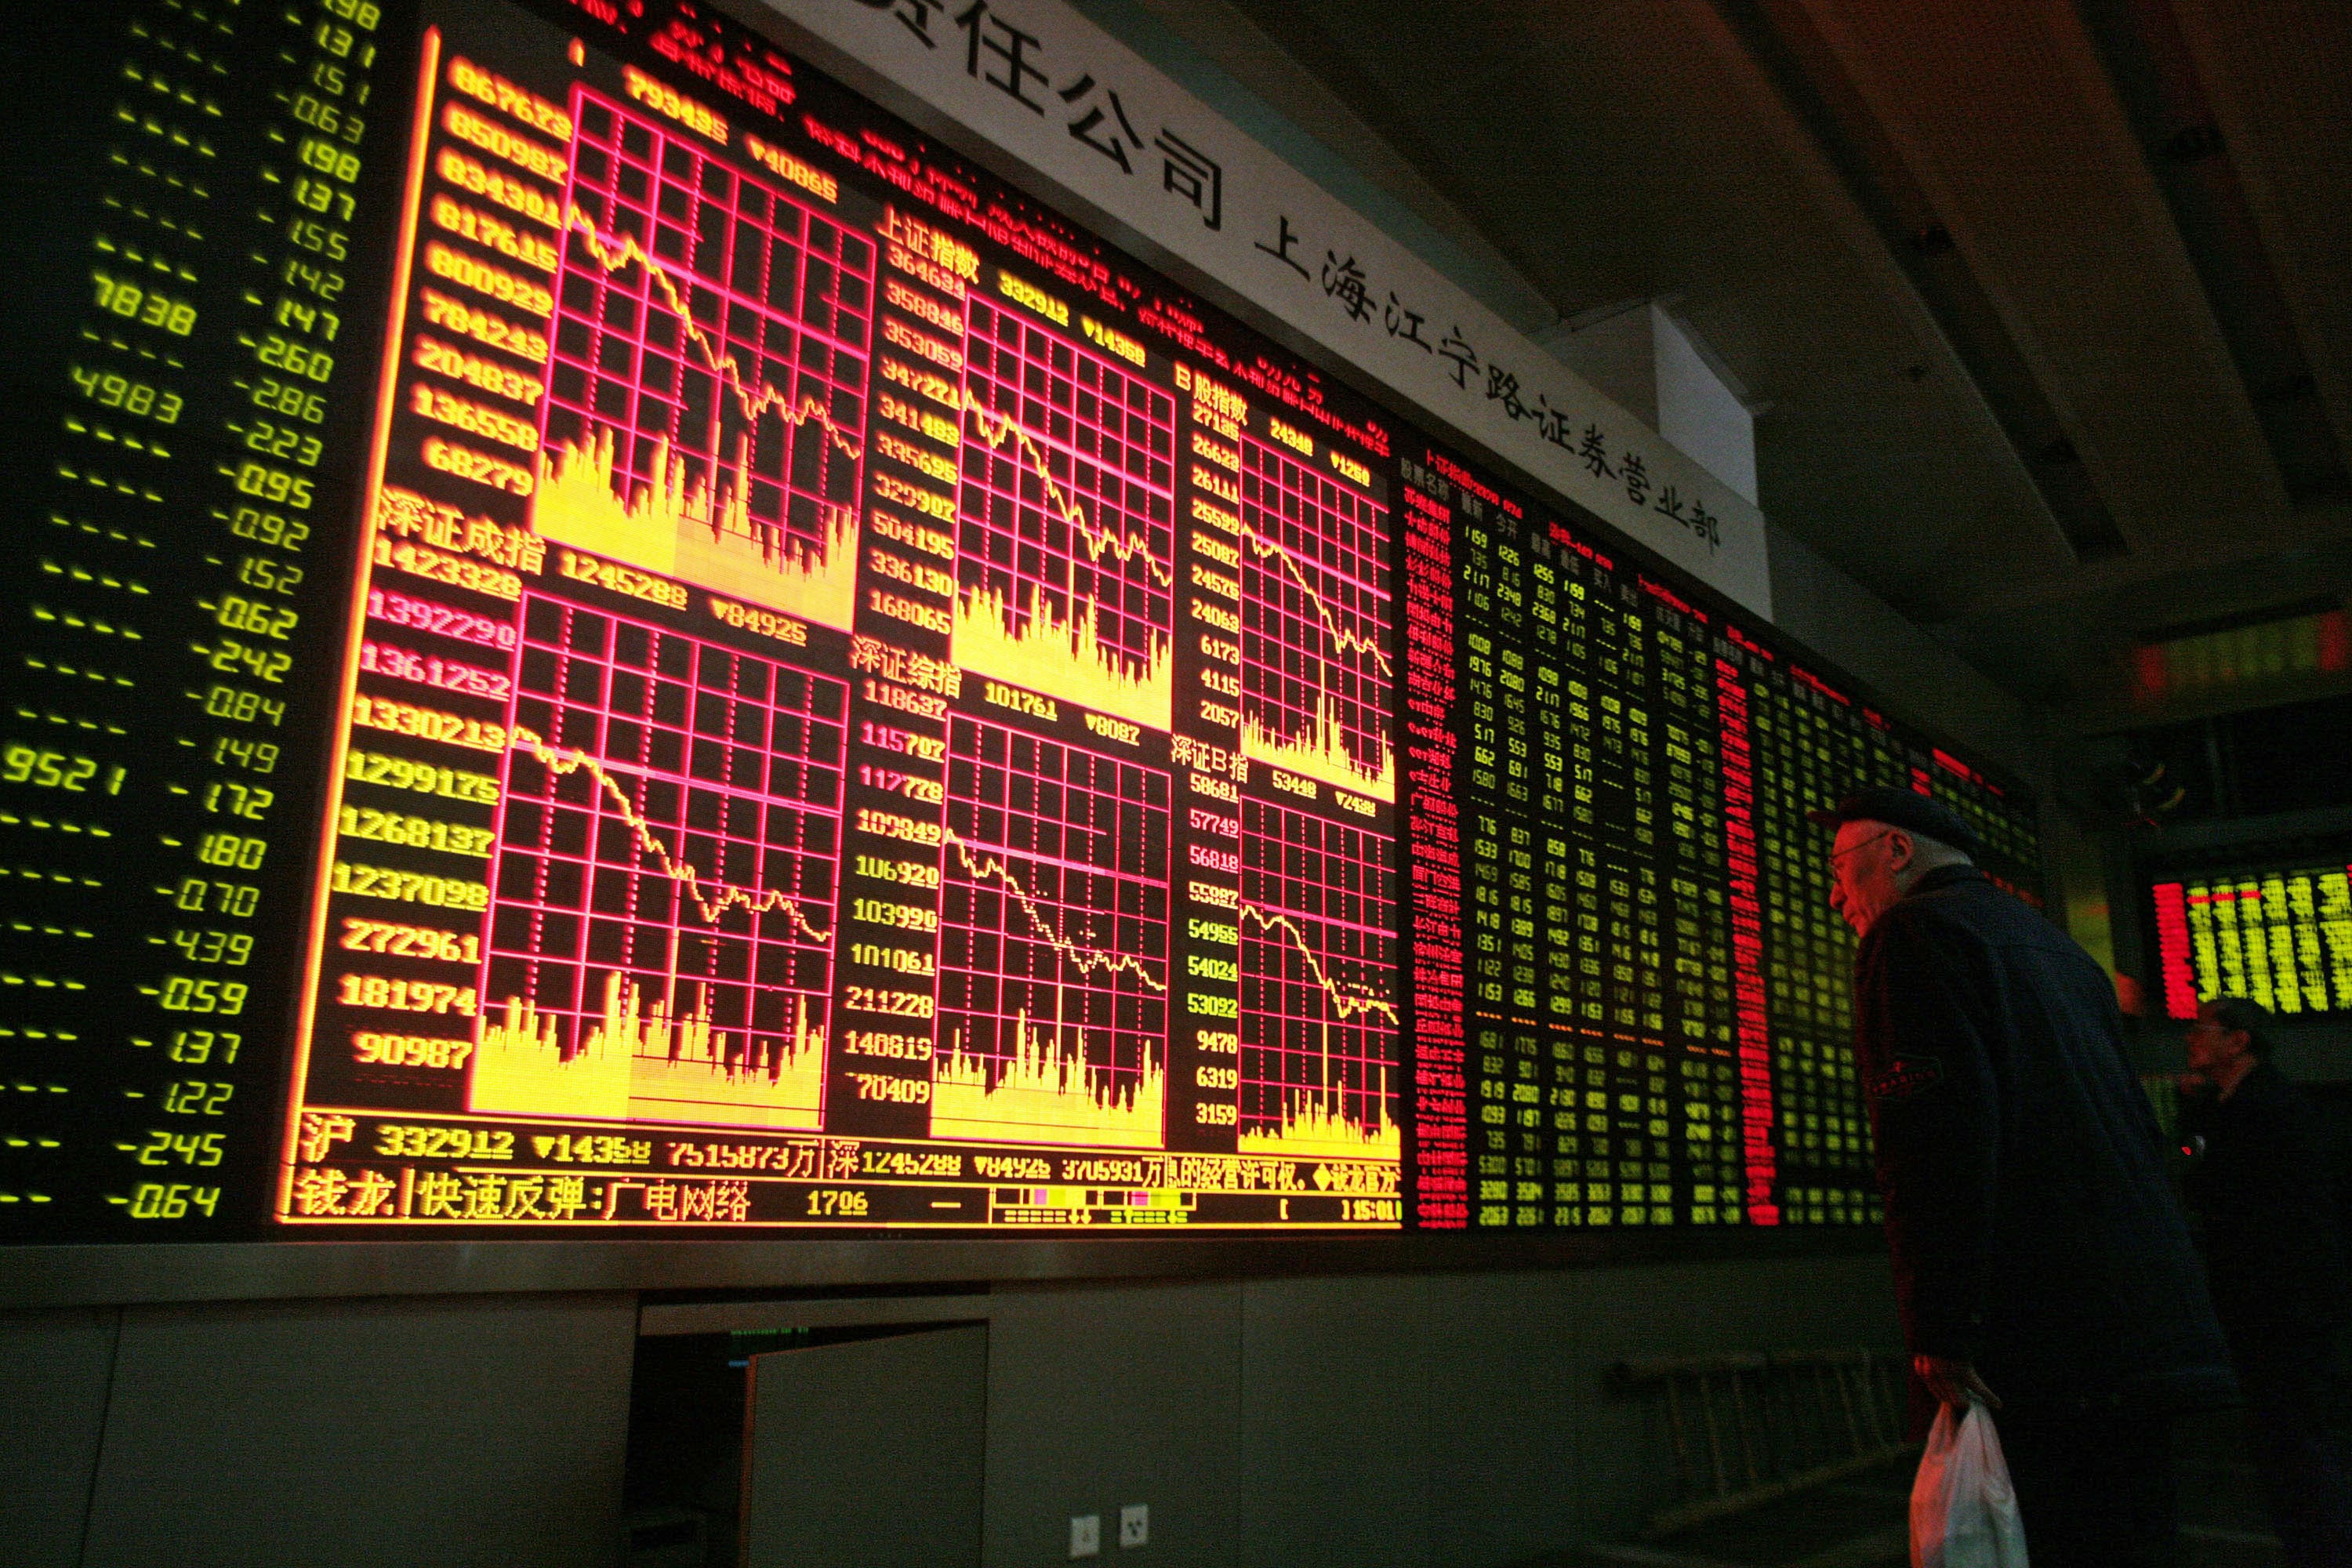 Shanghai Stock Exchange Outlines Key Developments for Chinese Market